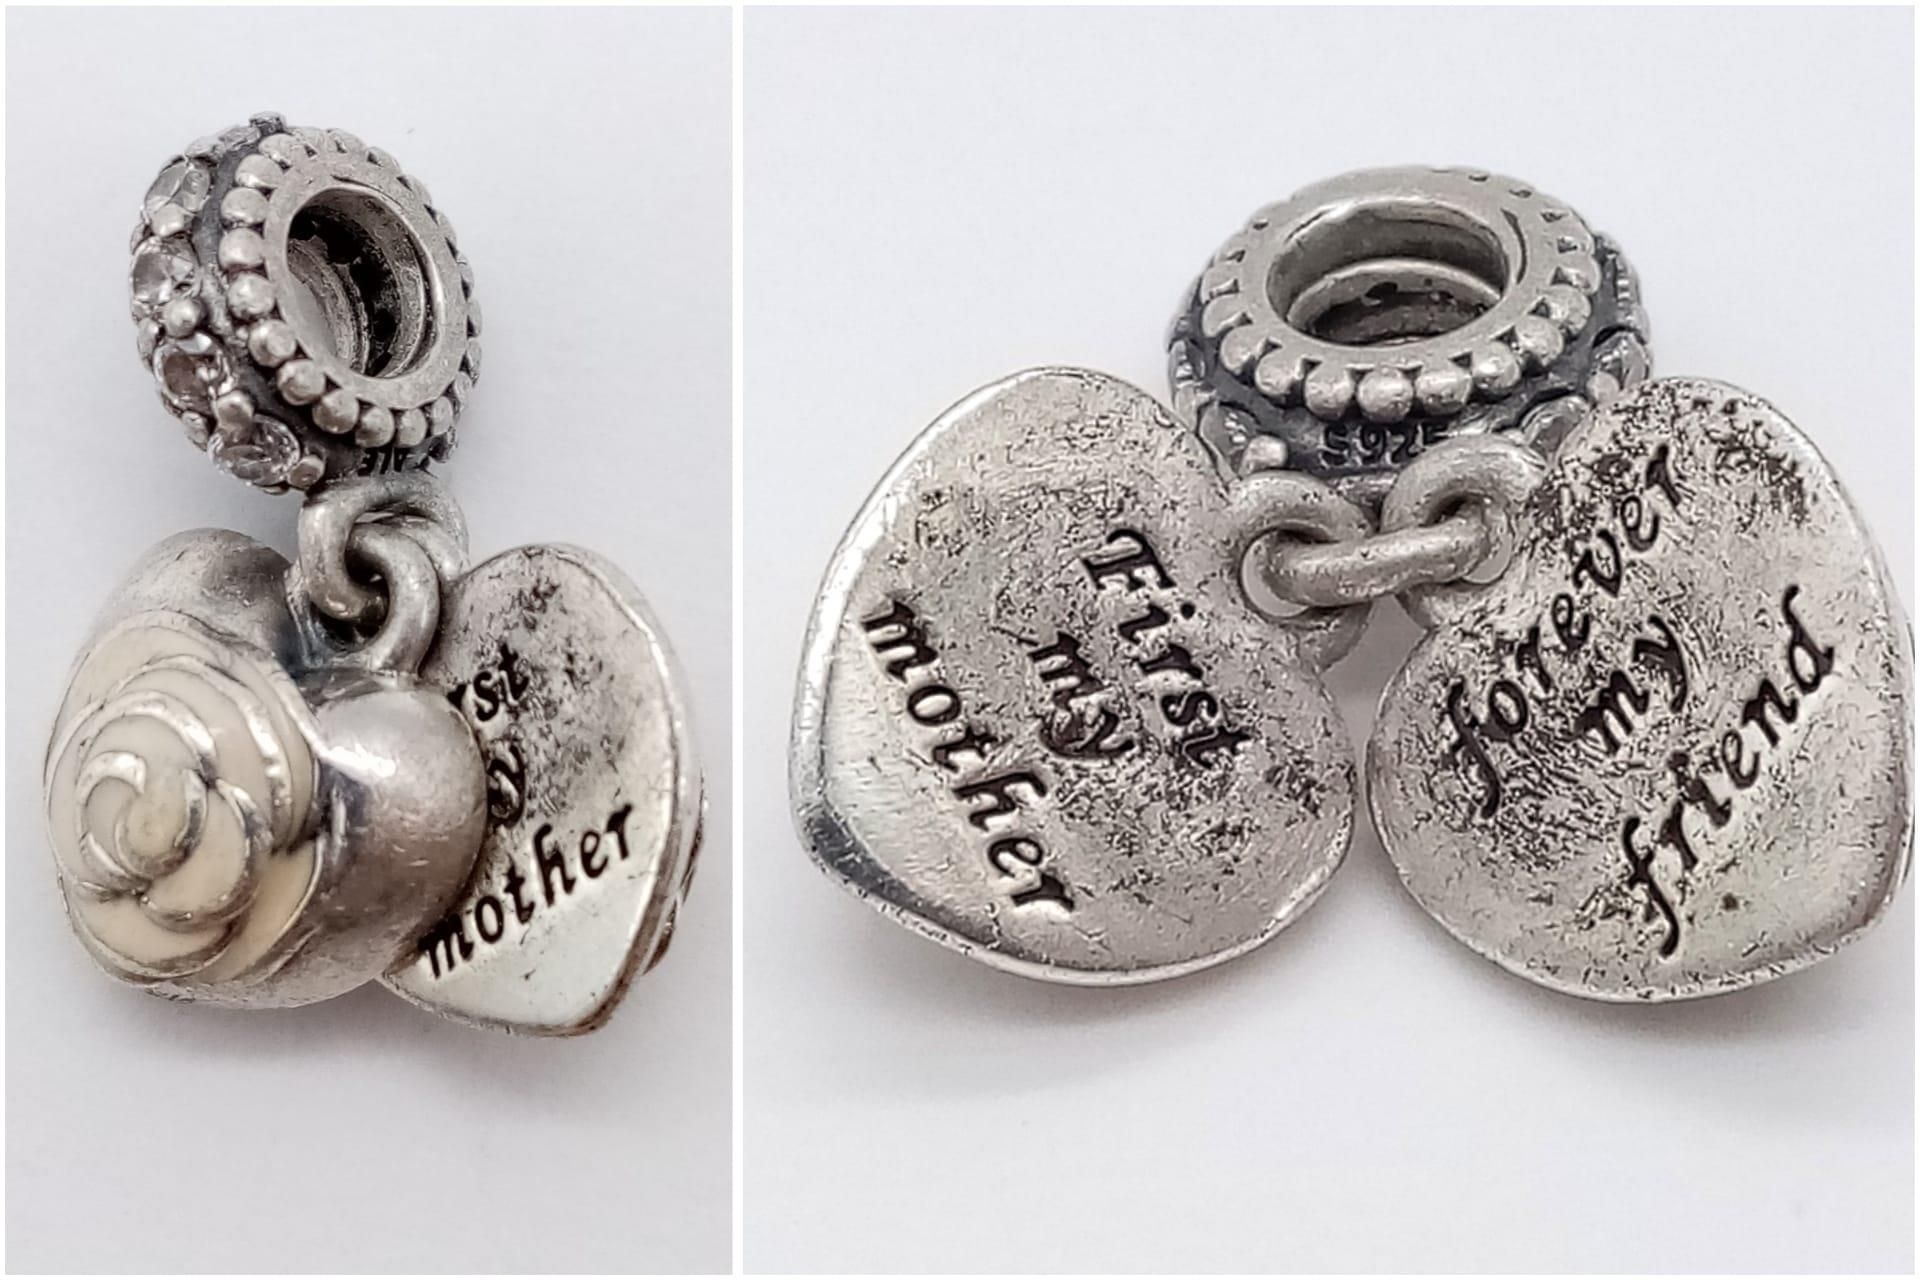 2 x Pandora Sterling Silver Heart Charms - one says 'Family' and the other says 'First My Mother, - Image 6 of 13